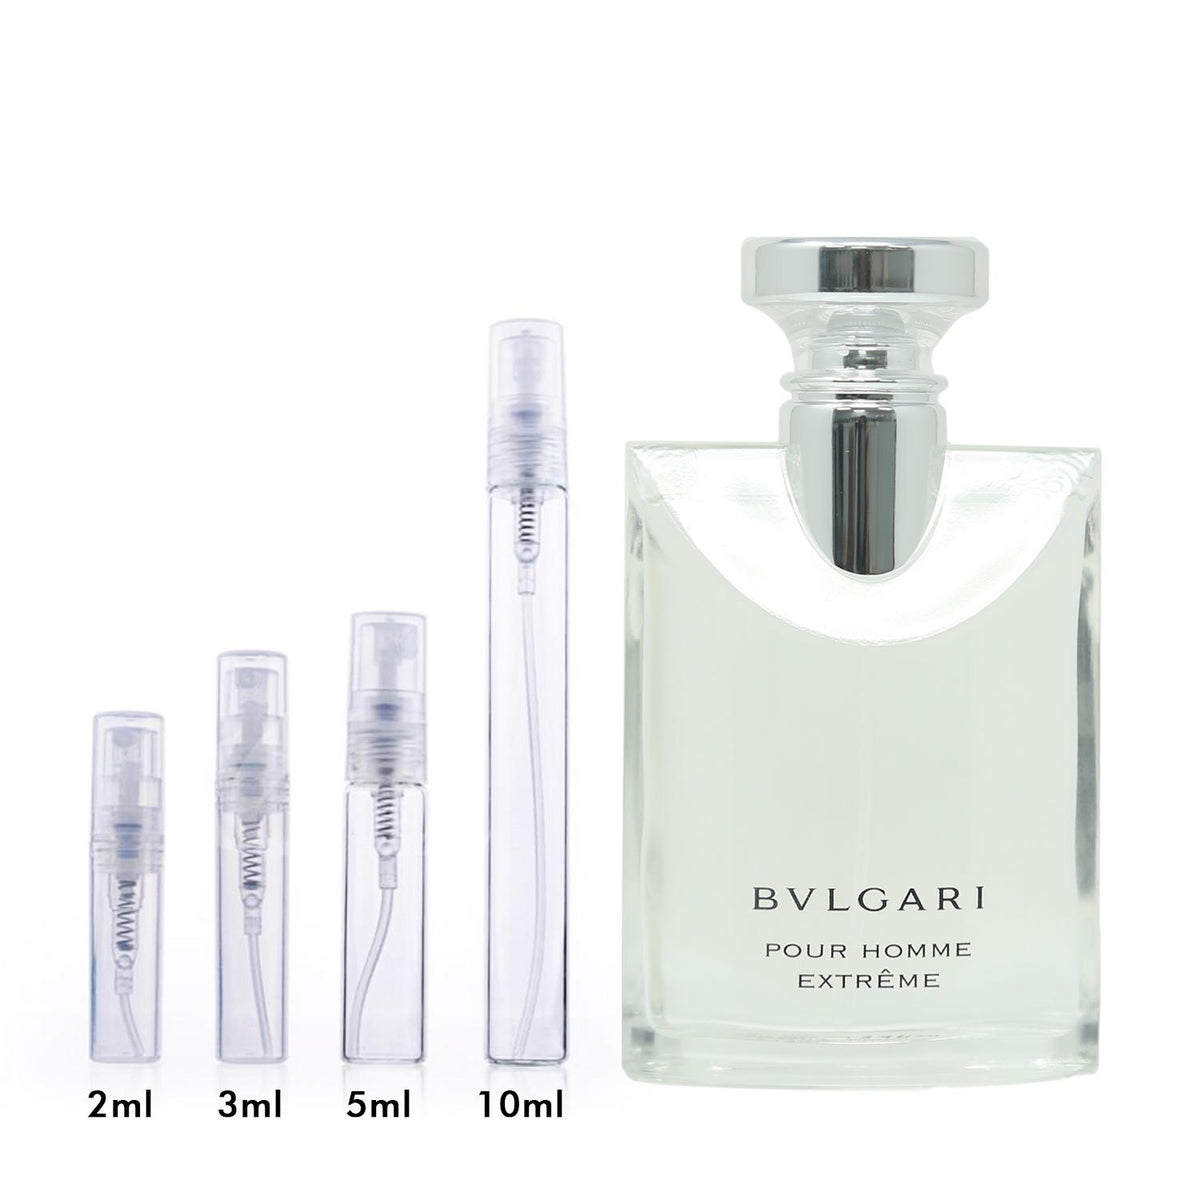 Pour Homme Extreme by Bvlgari Fragrance Samples